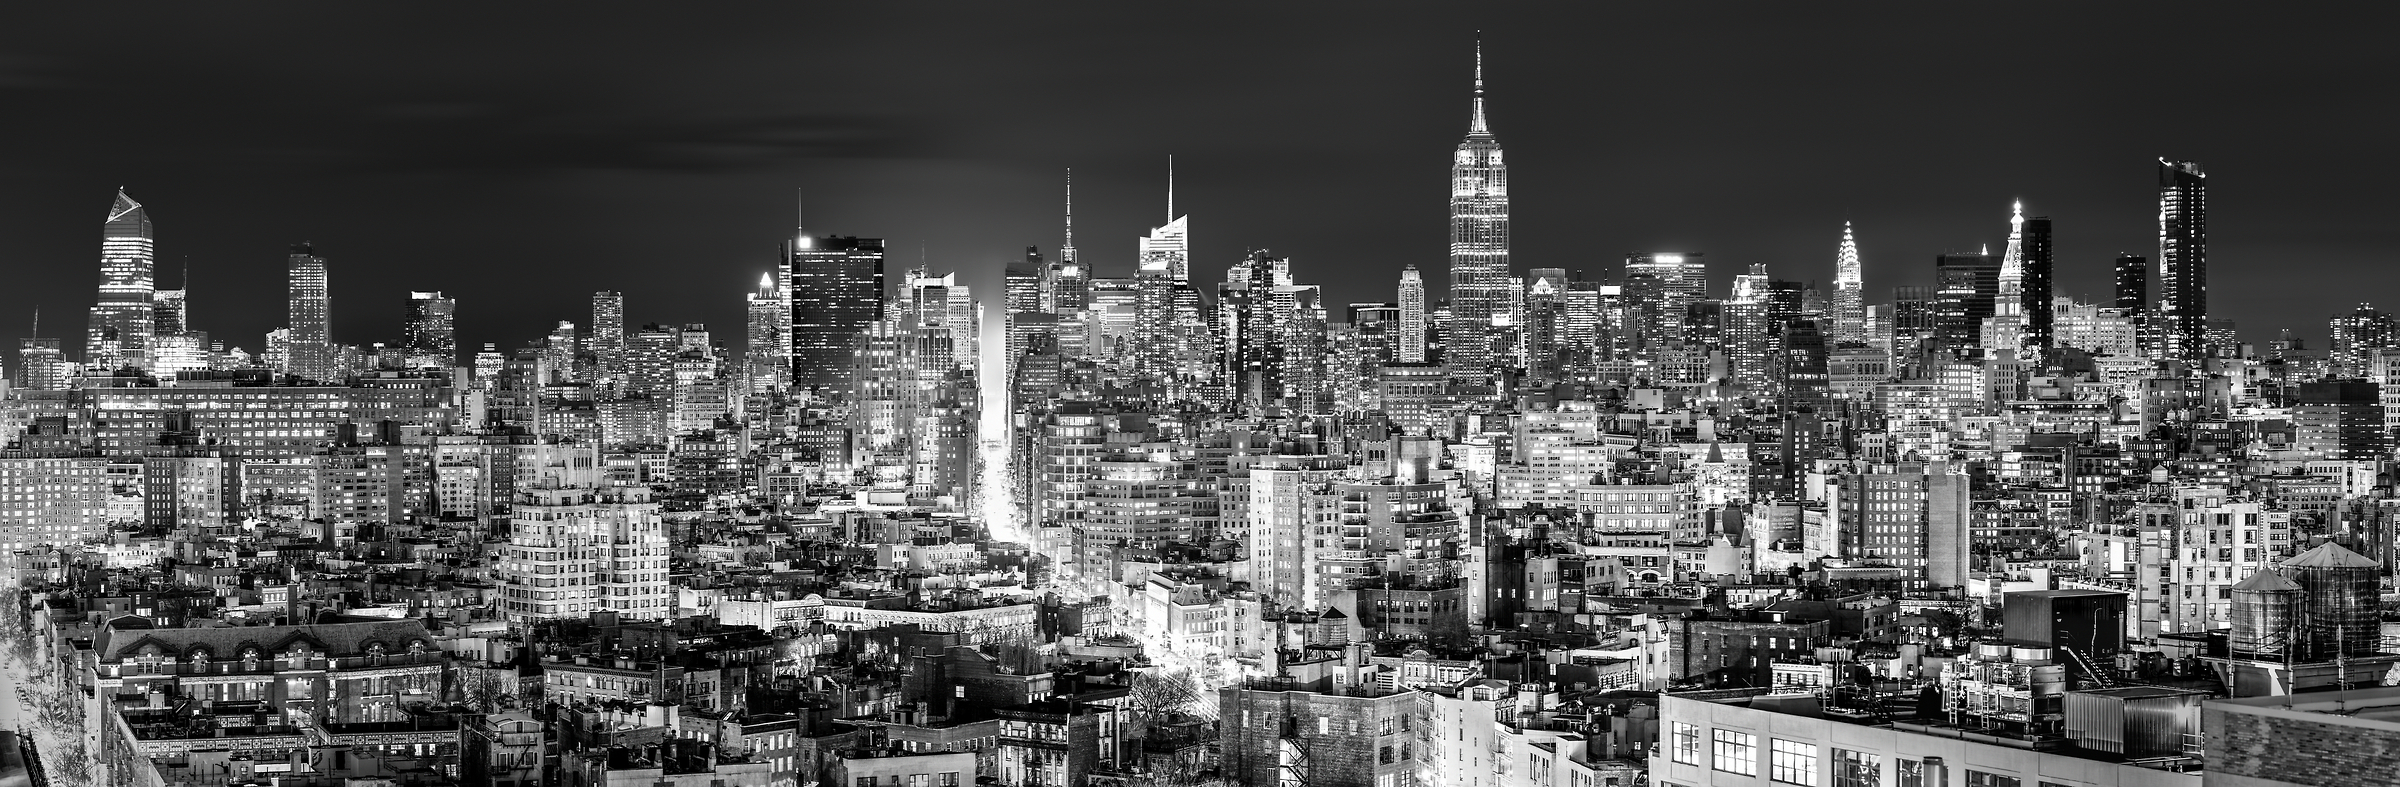 2,392 megapixels! A very high resolution, large-format VAST photo print of the Manhattan, New York City skyline at night; cityscape photo created by Dan Piech